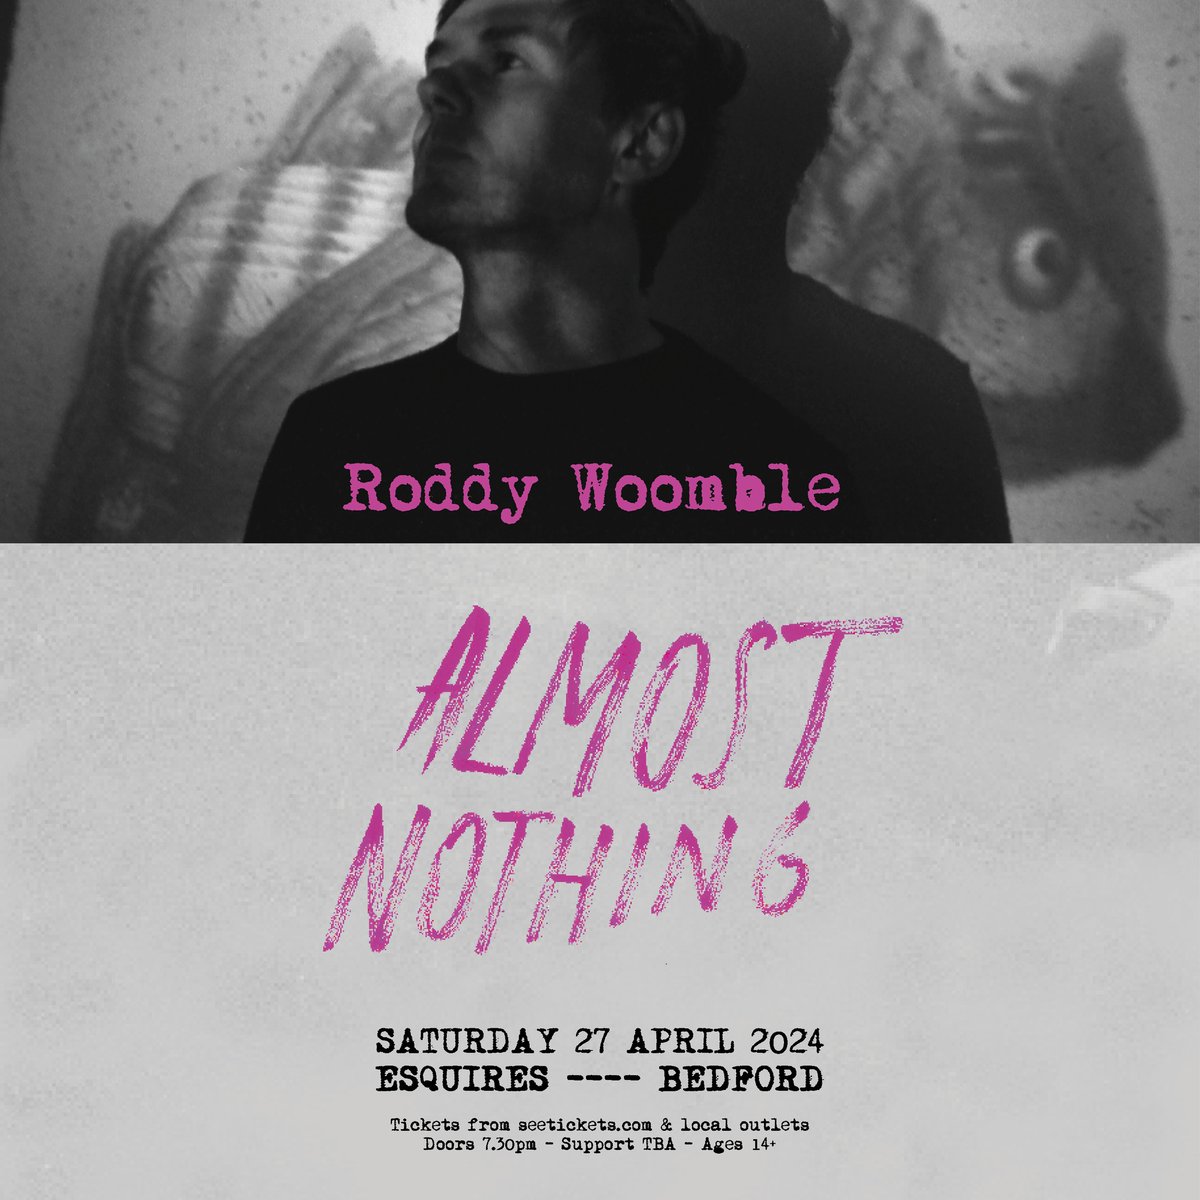 Bedford! Tonight you've got Roddy Woomble @RoddyWoomble at @BedfordEsquires - final chance for tonight's show, here >> allgigs.co.uk/view/artist/50…